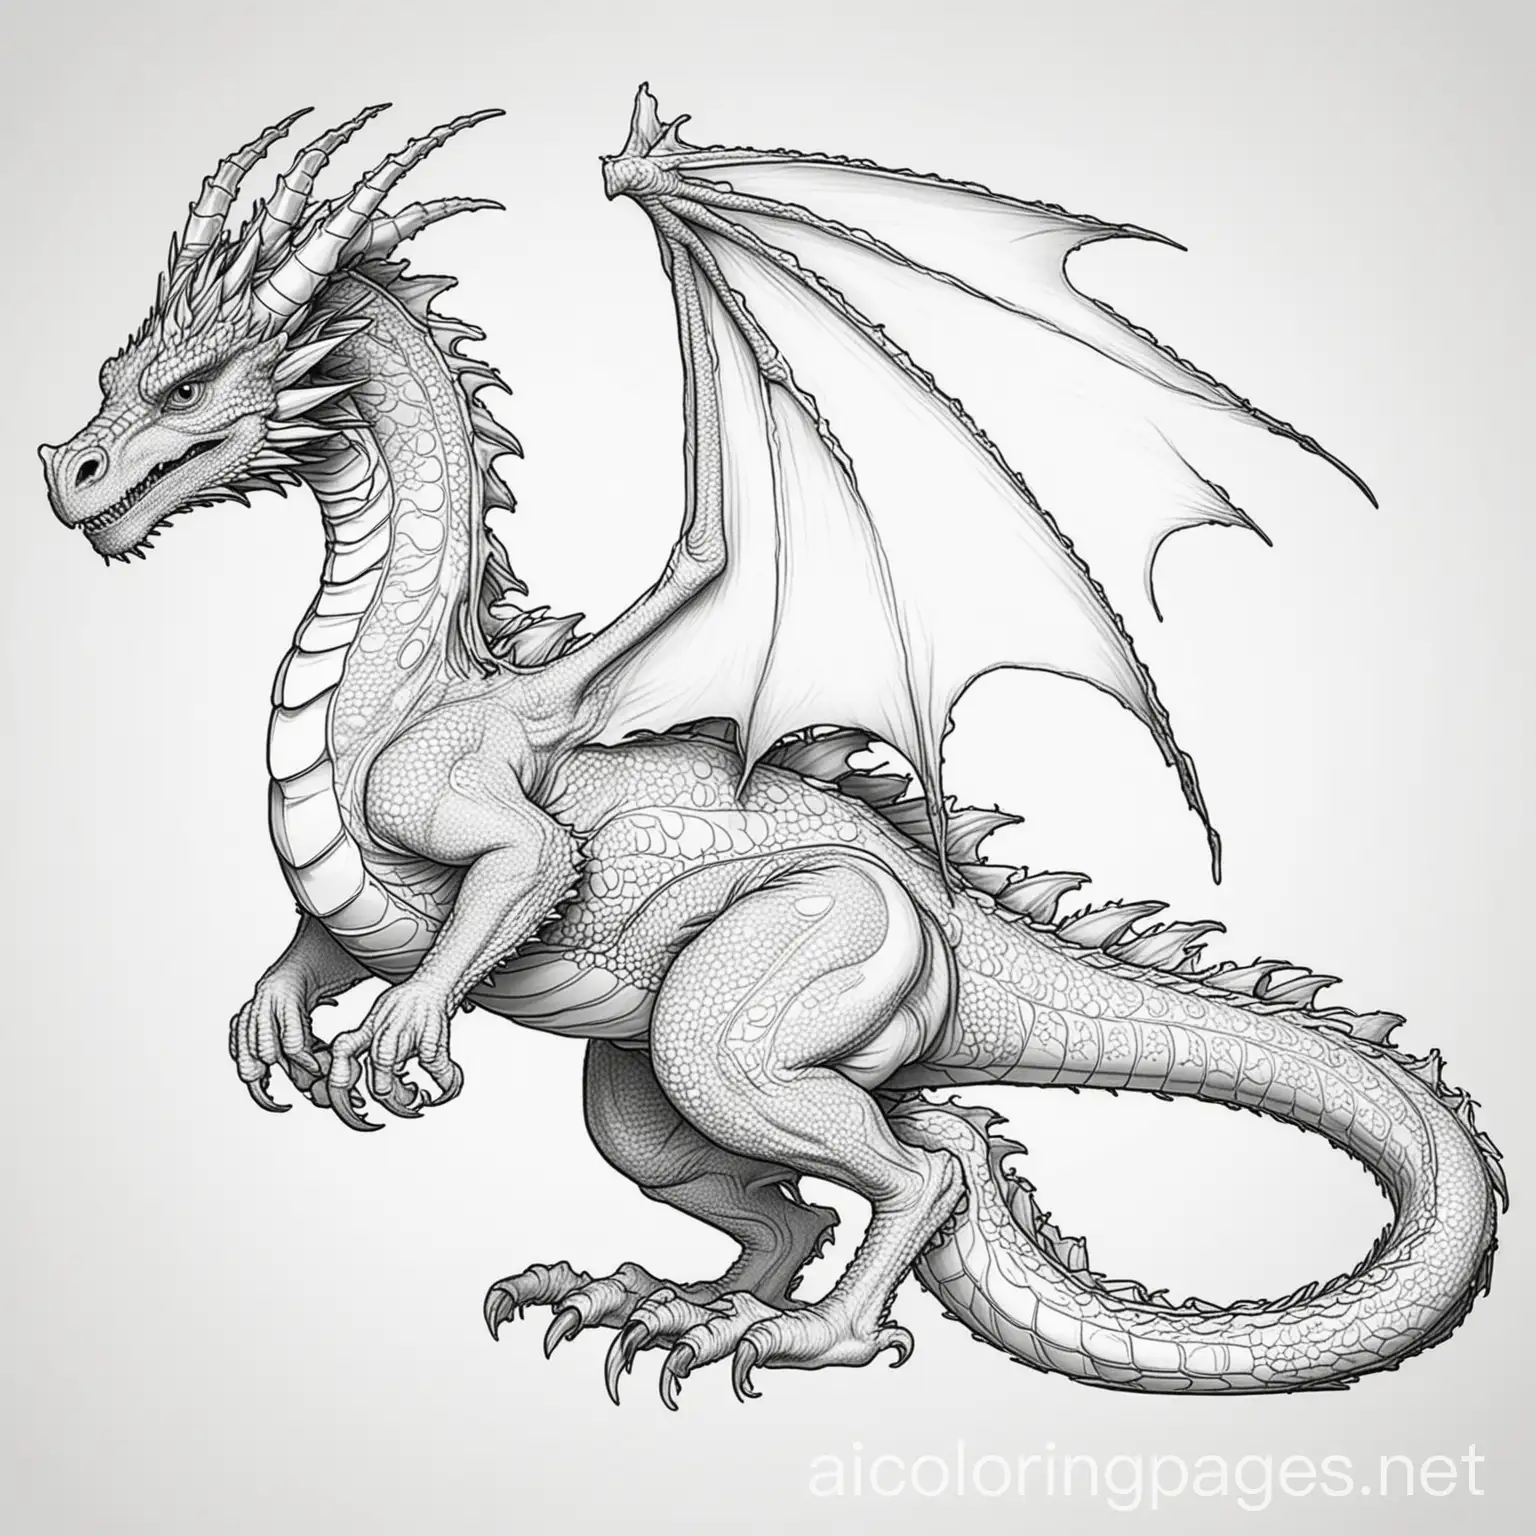 Western-Dragon-Coloring-Page-for-Kids-Simple-Line-Art-on-White-Background